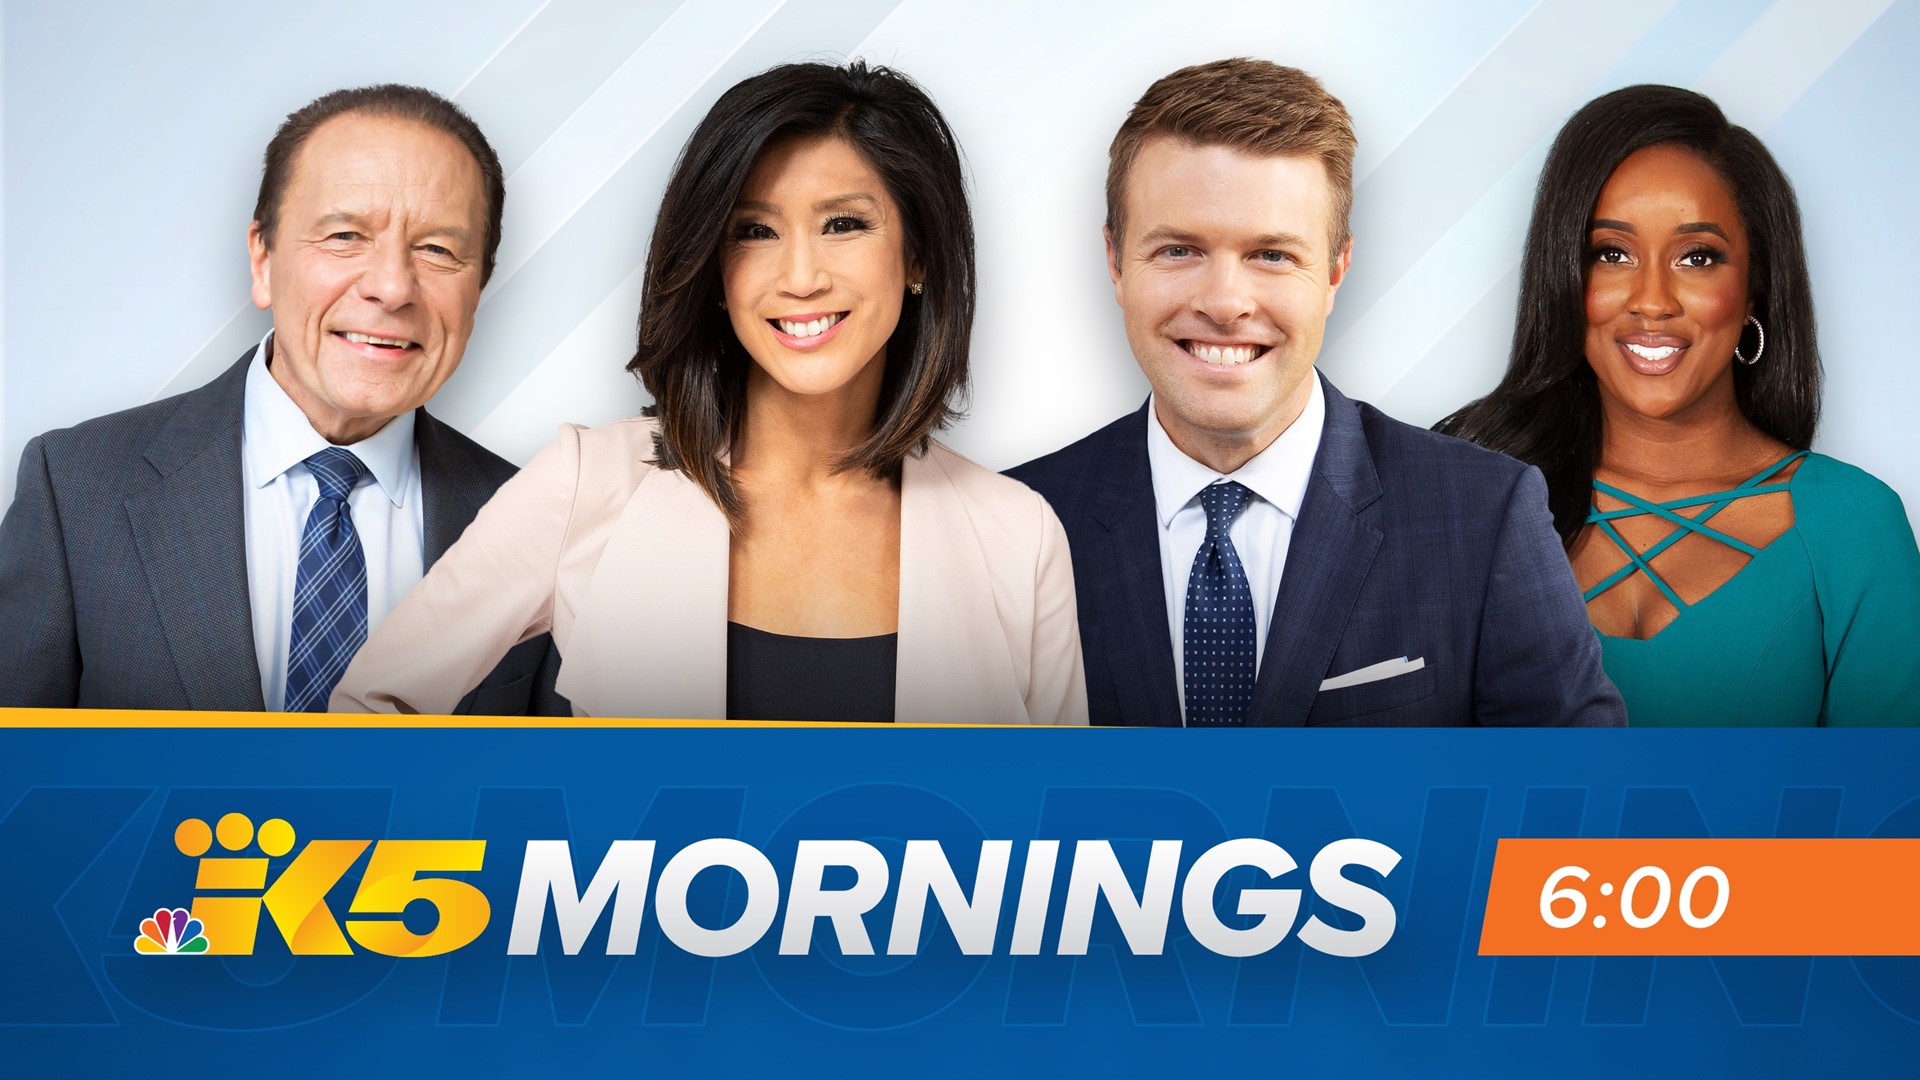 The KING 5 Mornings Team presents a first look at the biggest news stories in western Washington and beyond, along with up-to-the-minute weather and traffic.